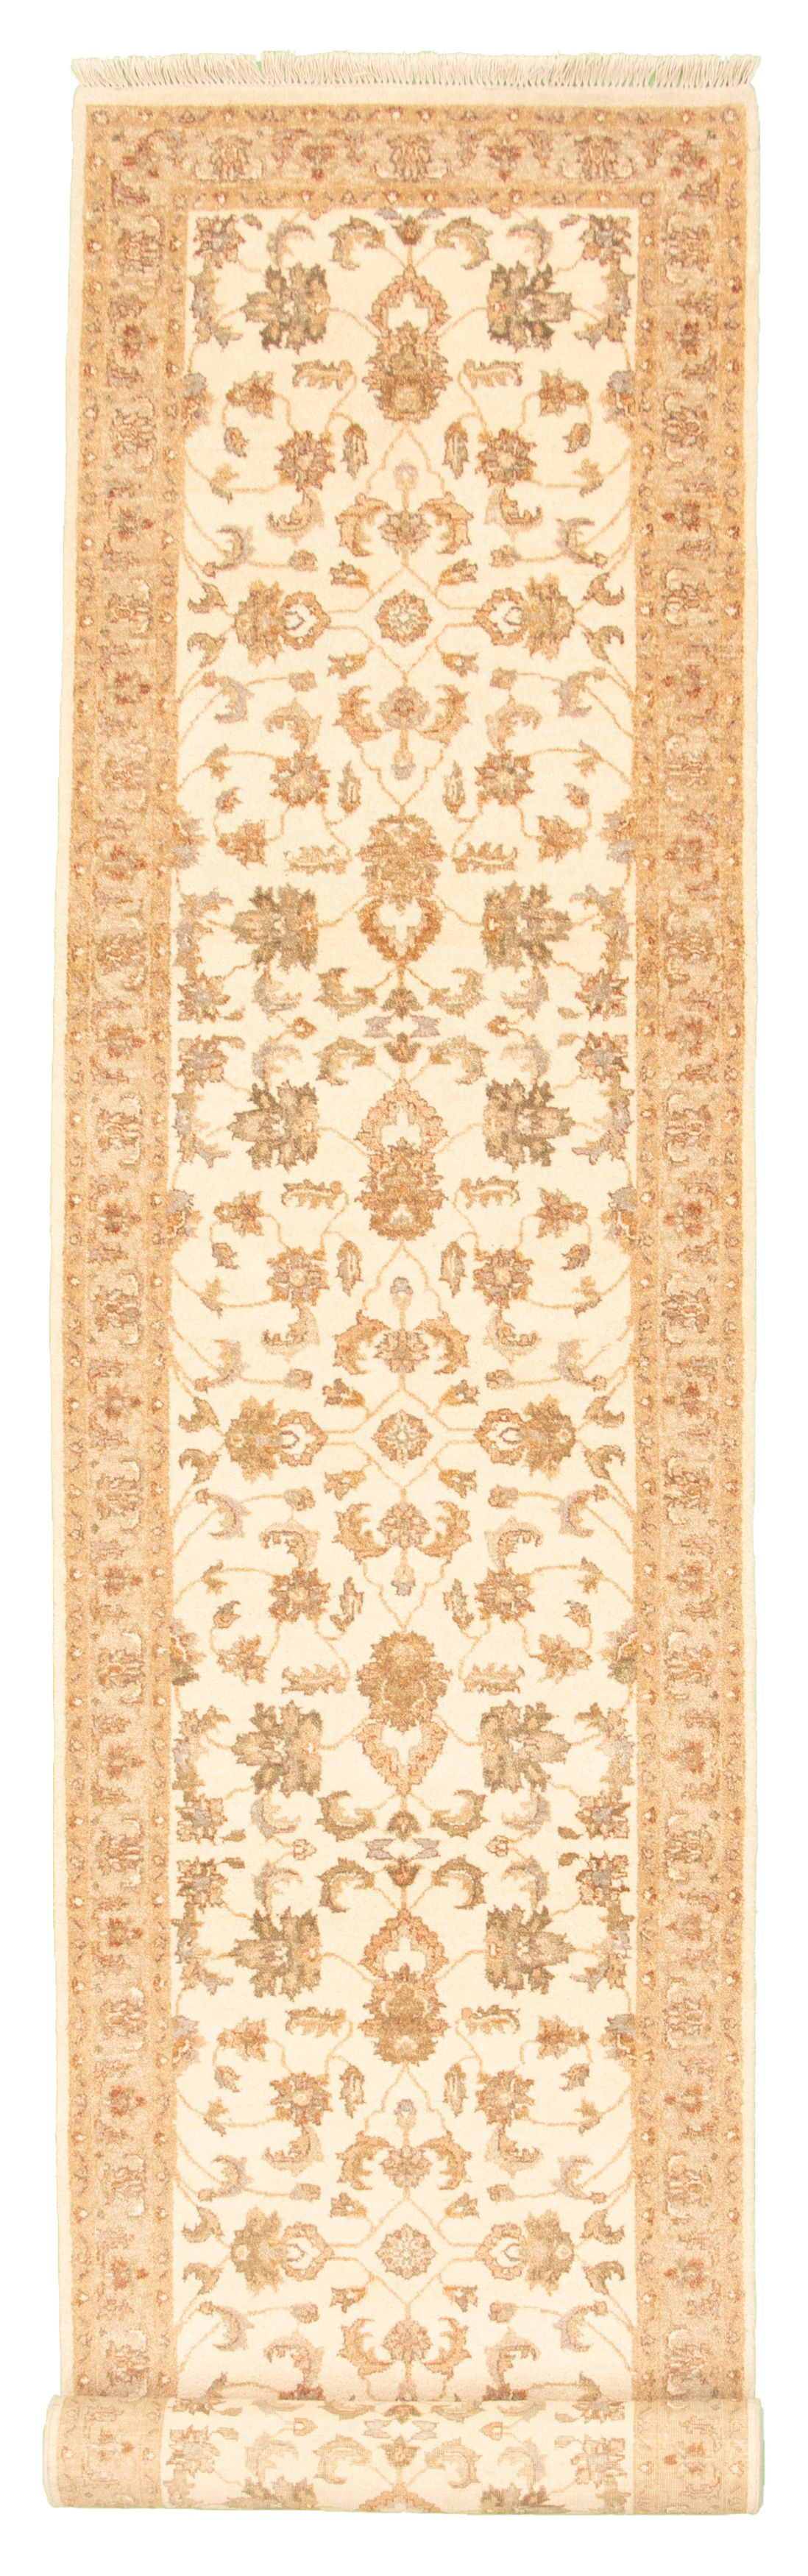 Hand-knotted Chobi Twisted Cream Wool Rug 3'0" x 15'2" Size: 3'0" x 15'2"  